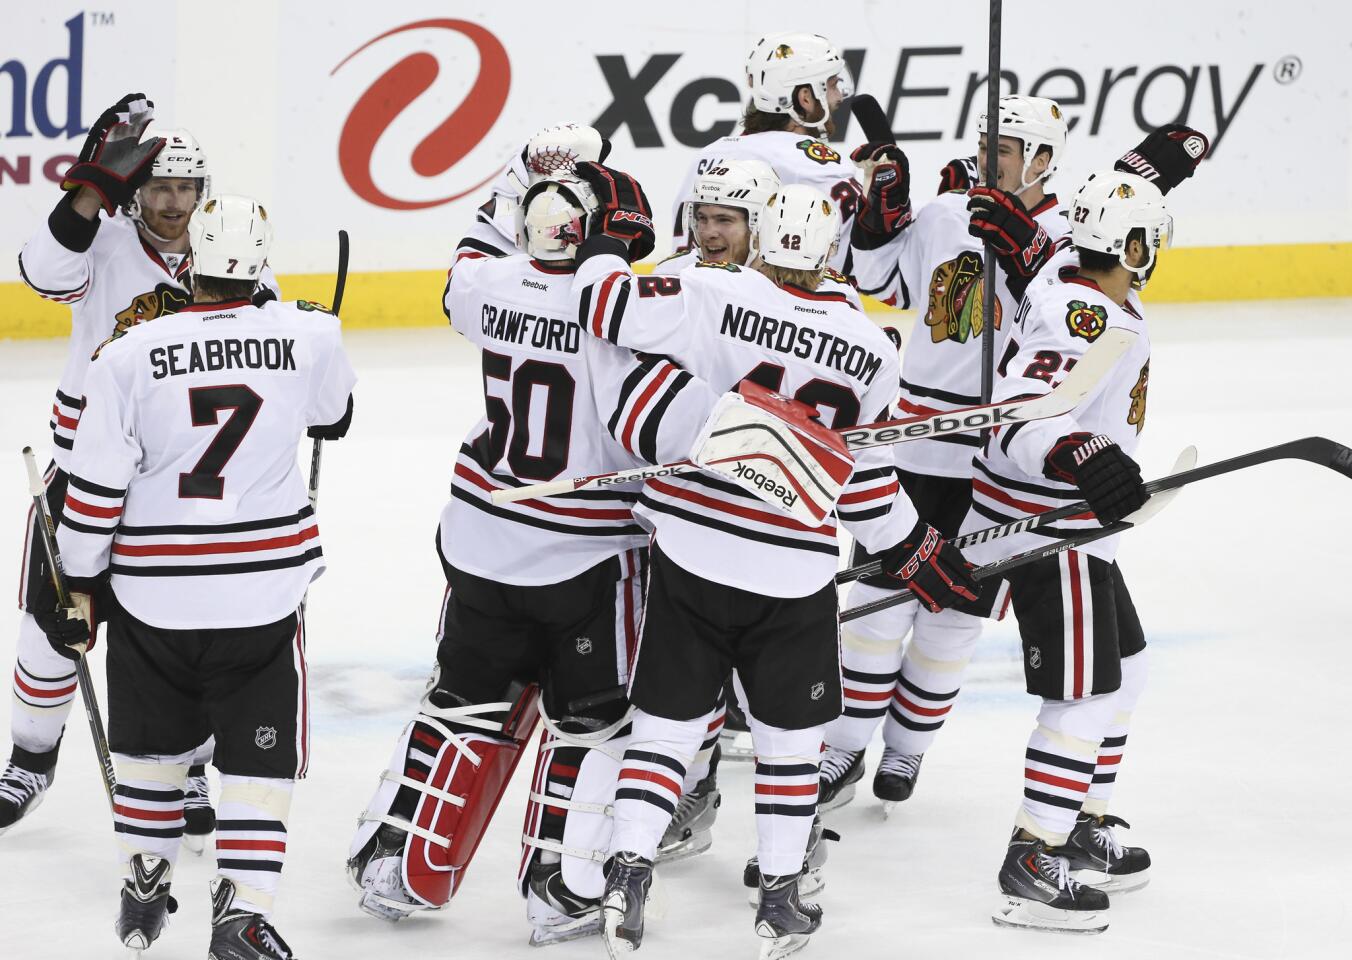 Blackhawks players celebrate their series-clinching win in overtime.